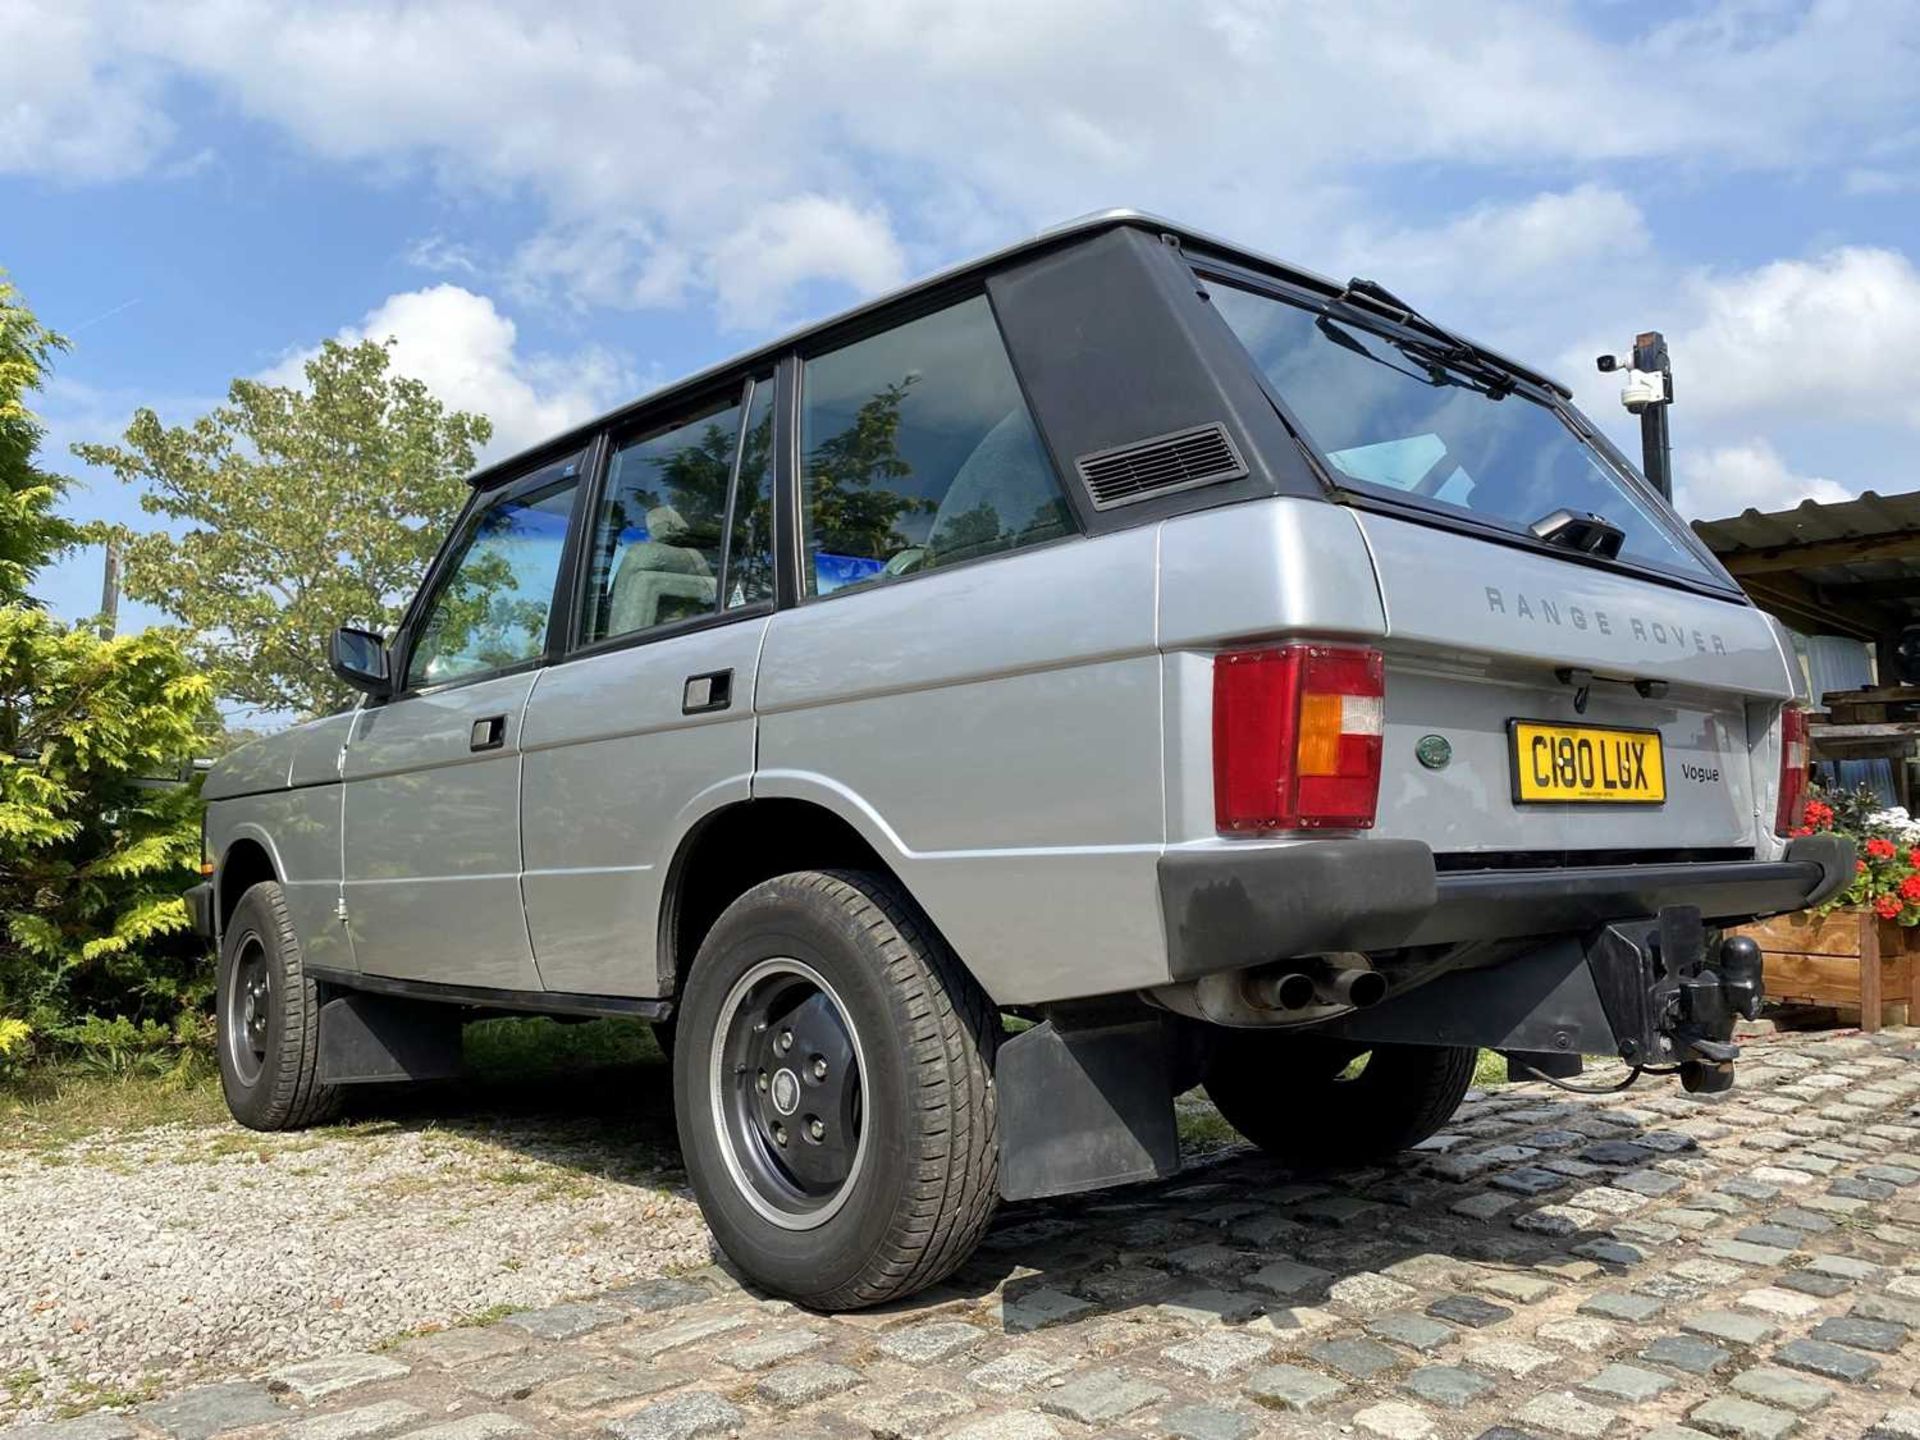 1985 Range Rover Vogue EFI Superbly presented with the benefit of a galvanised chassis - Image 20 of 46